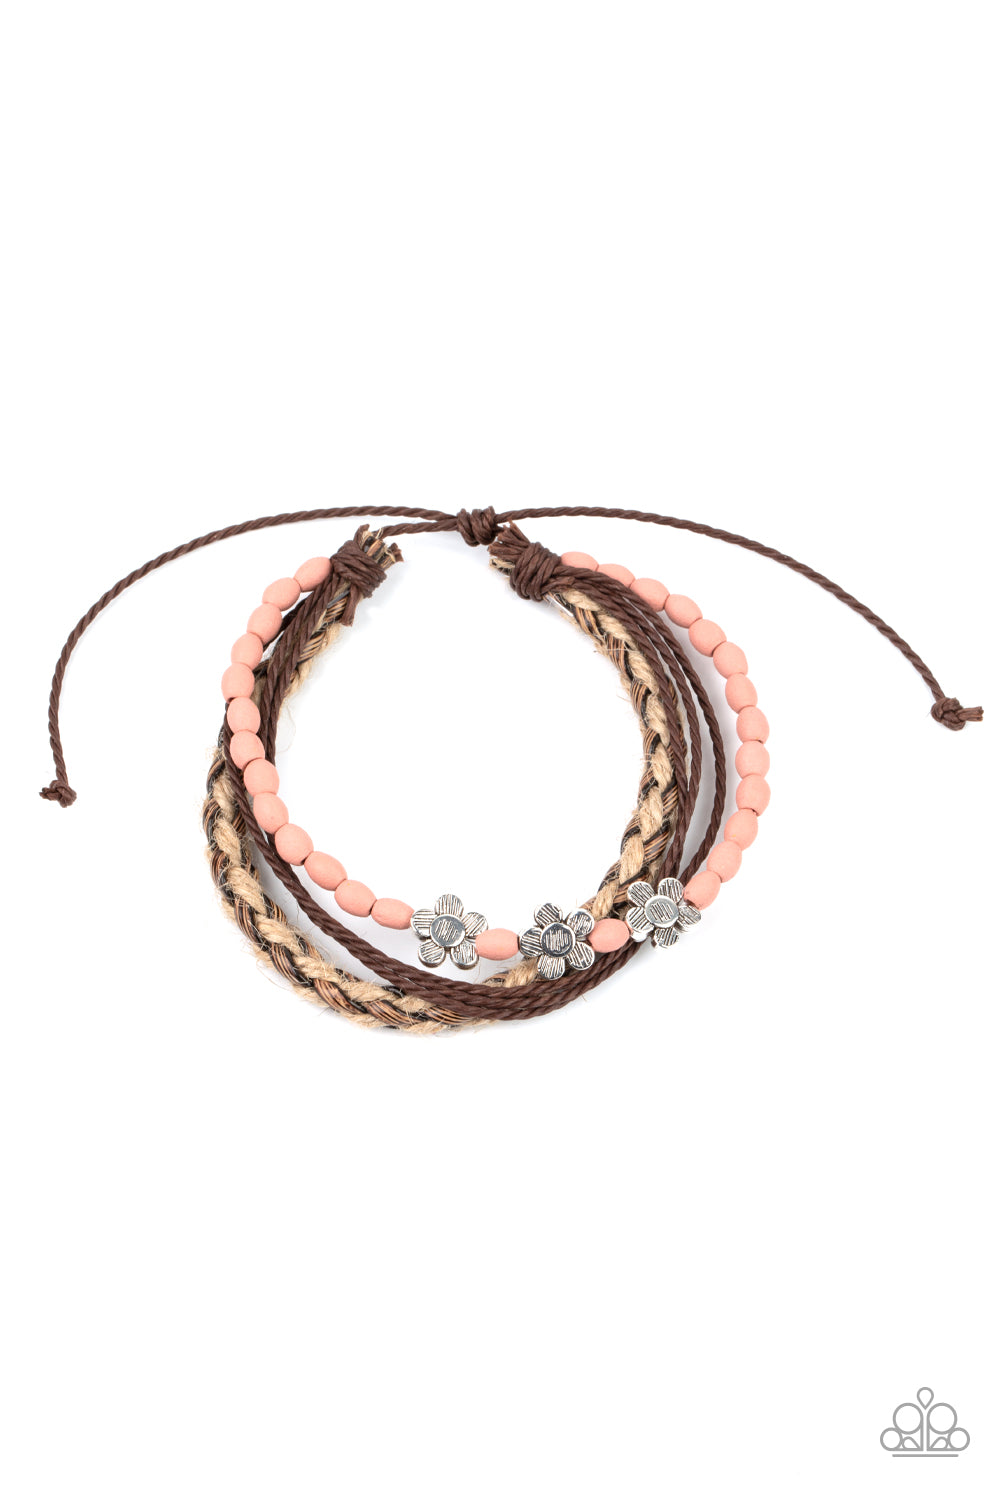 Paparazzi Accessories - Three delightful etched silver flowers stand out on a strand of baby pink wooden beads. Paired with an assortment of braided twine and cording, the set wraps around the wrist for an earthy remix. Features an adjustable sliding knot closure.